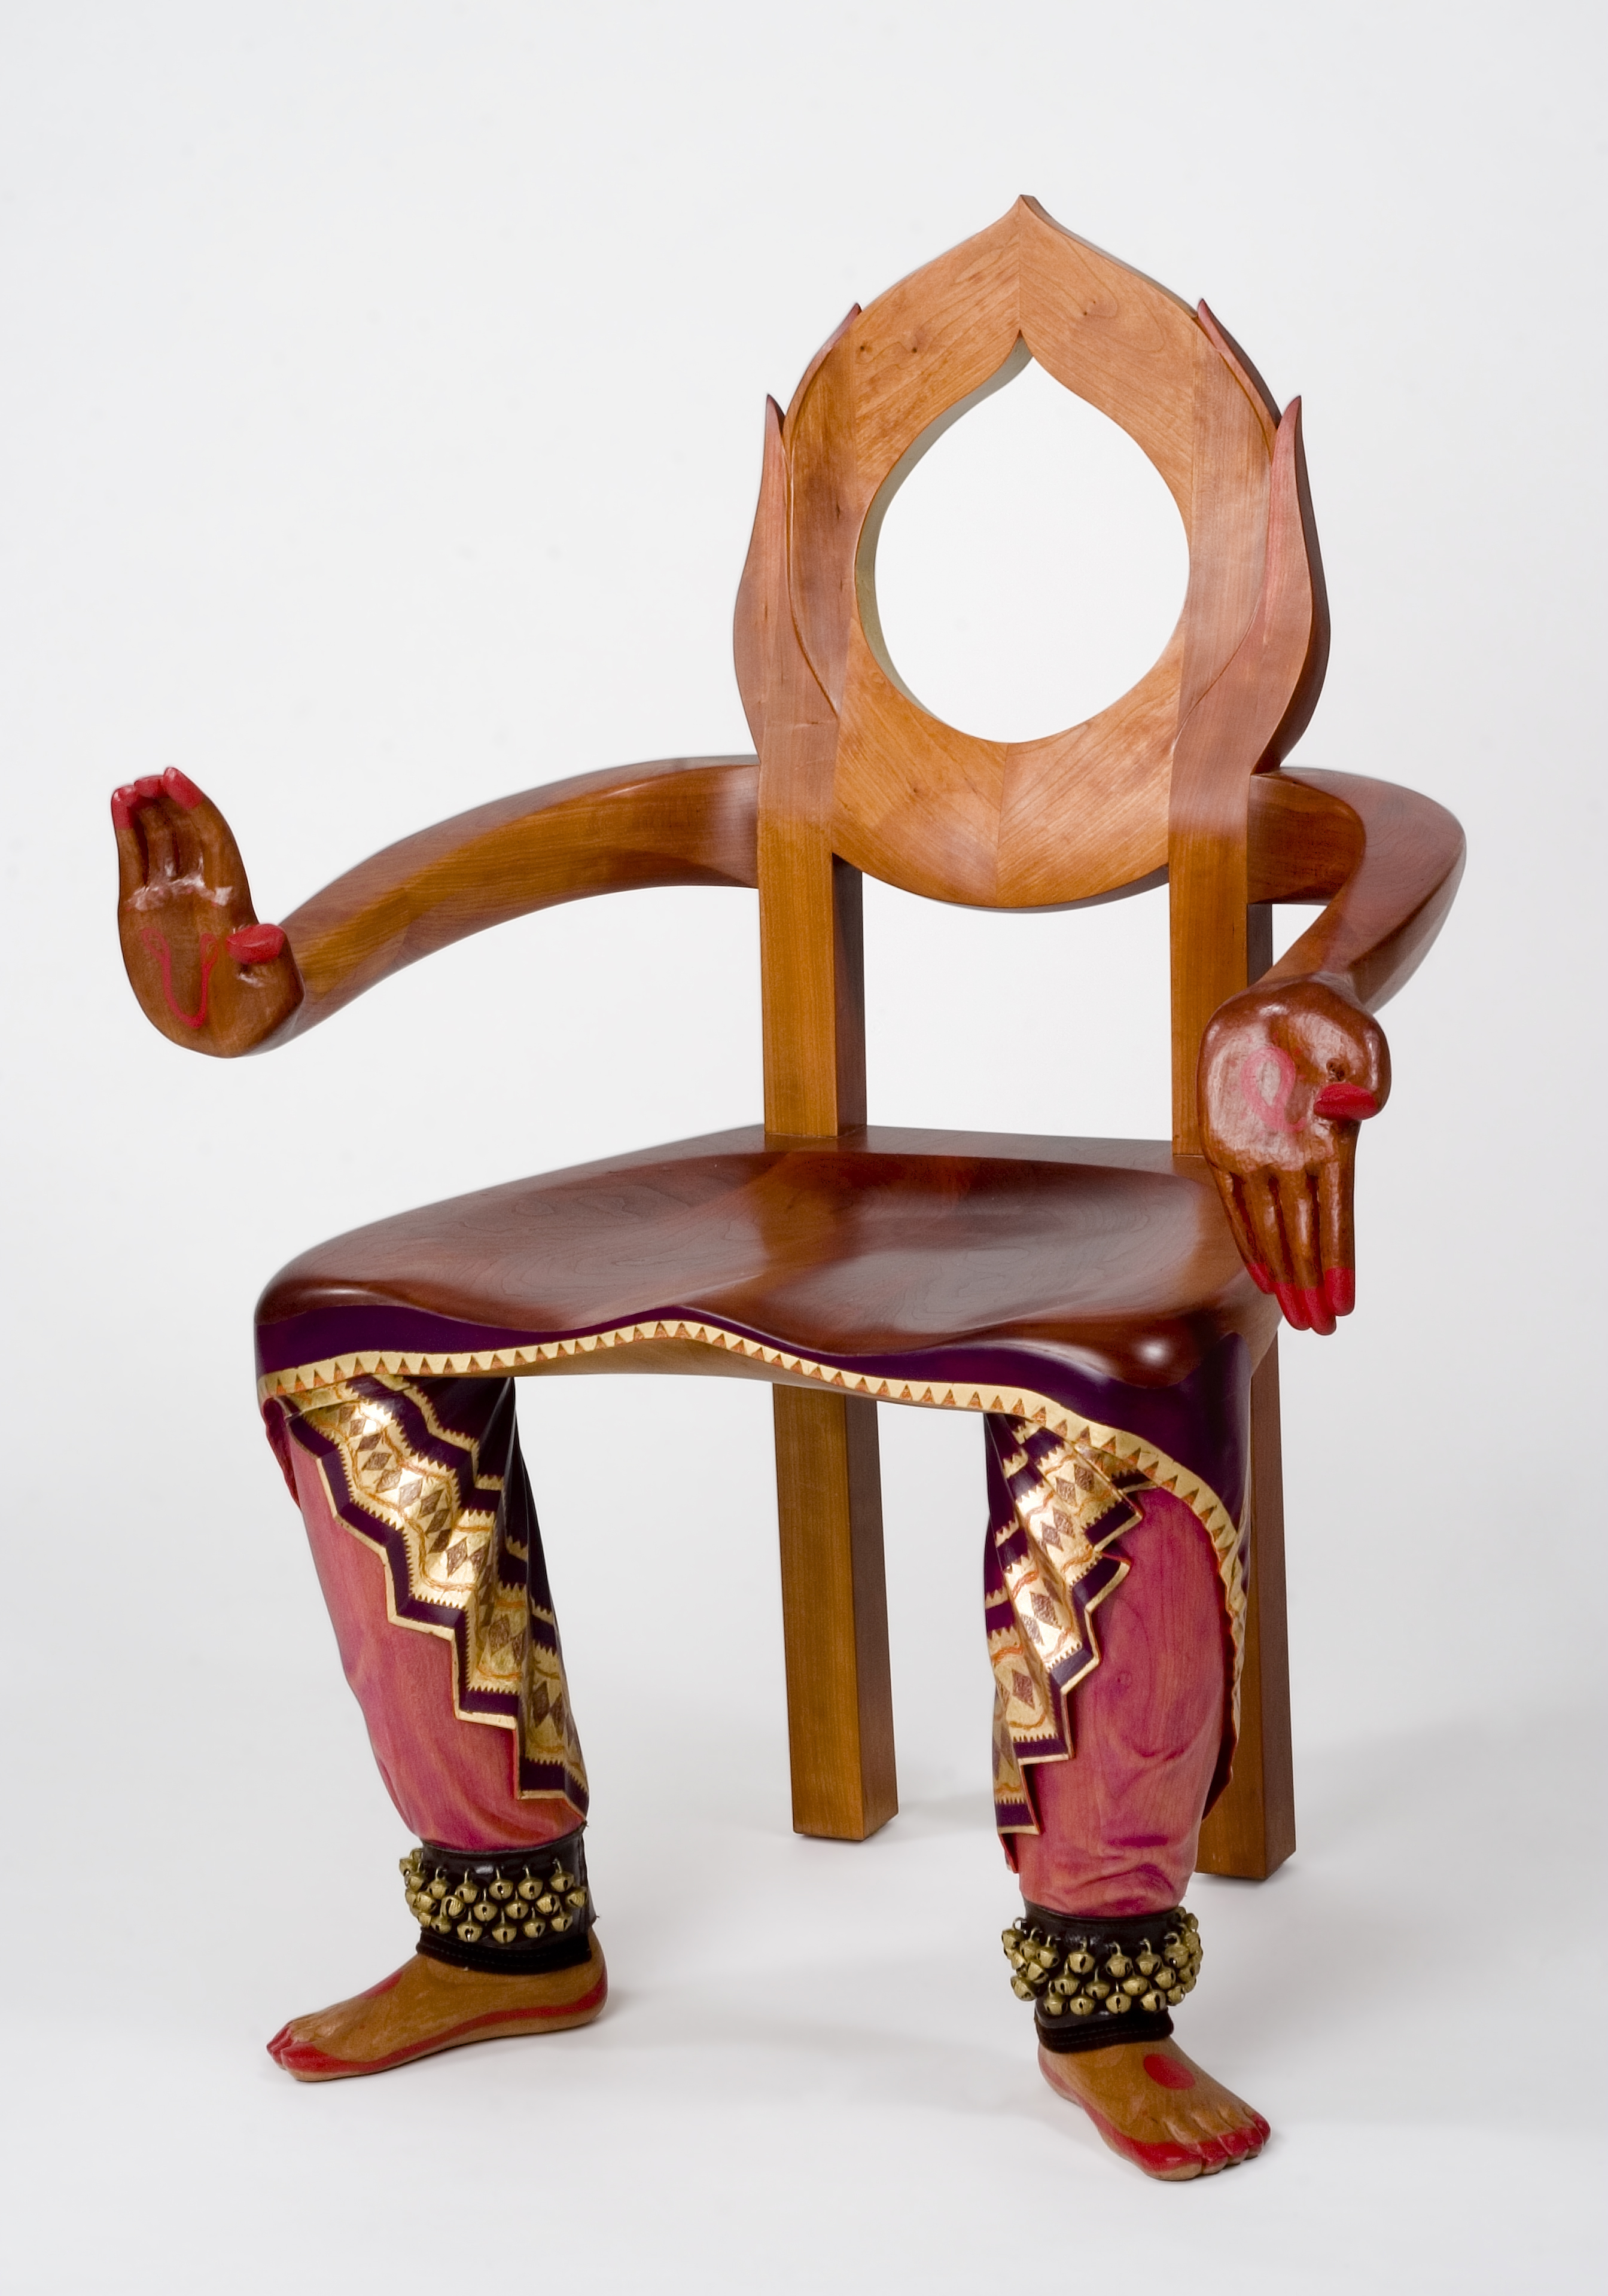 carved wooden chair with hands and lower legs reminiscent of a dancer